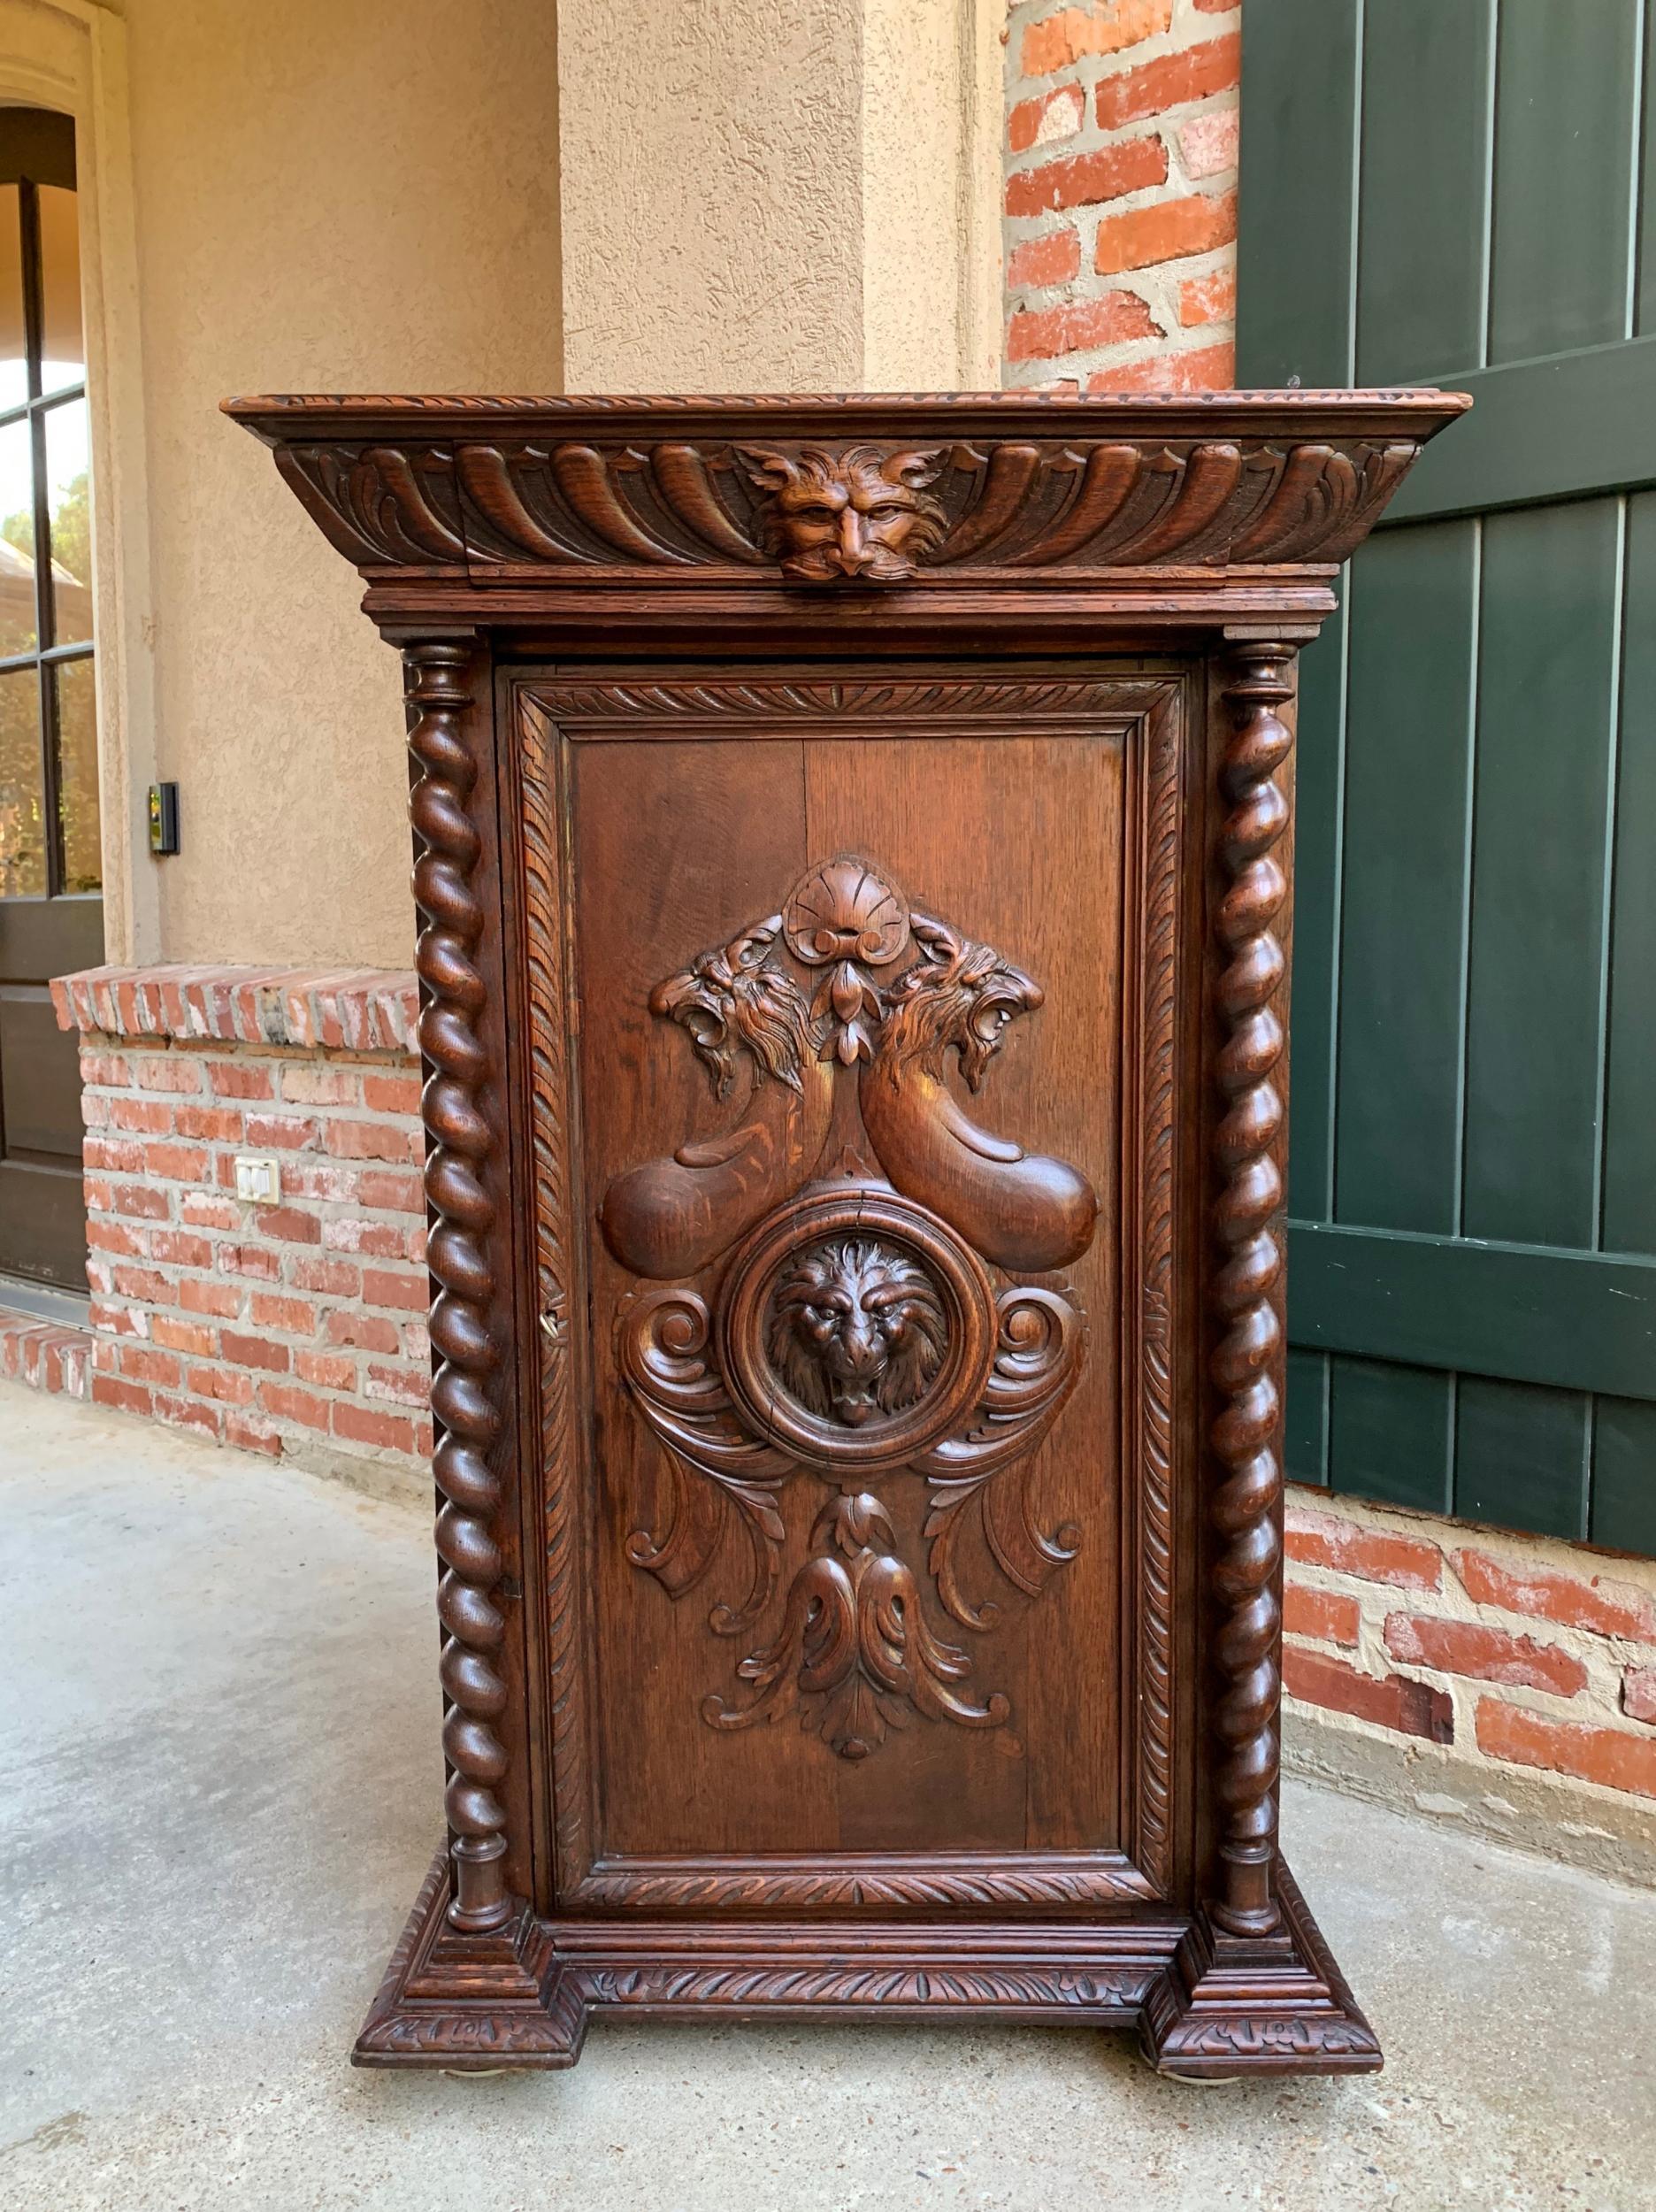 ~Direct from France~
~Gorgeous antique carved French ‘confiturier’ or jam cabinet~
~These cabinets are one of your most requested antiques, as they have so many uses in today’s home! From a vanity in the bath, to the kitchen, the foyer with a